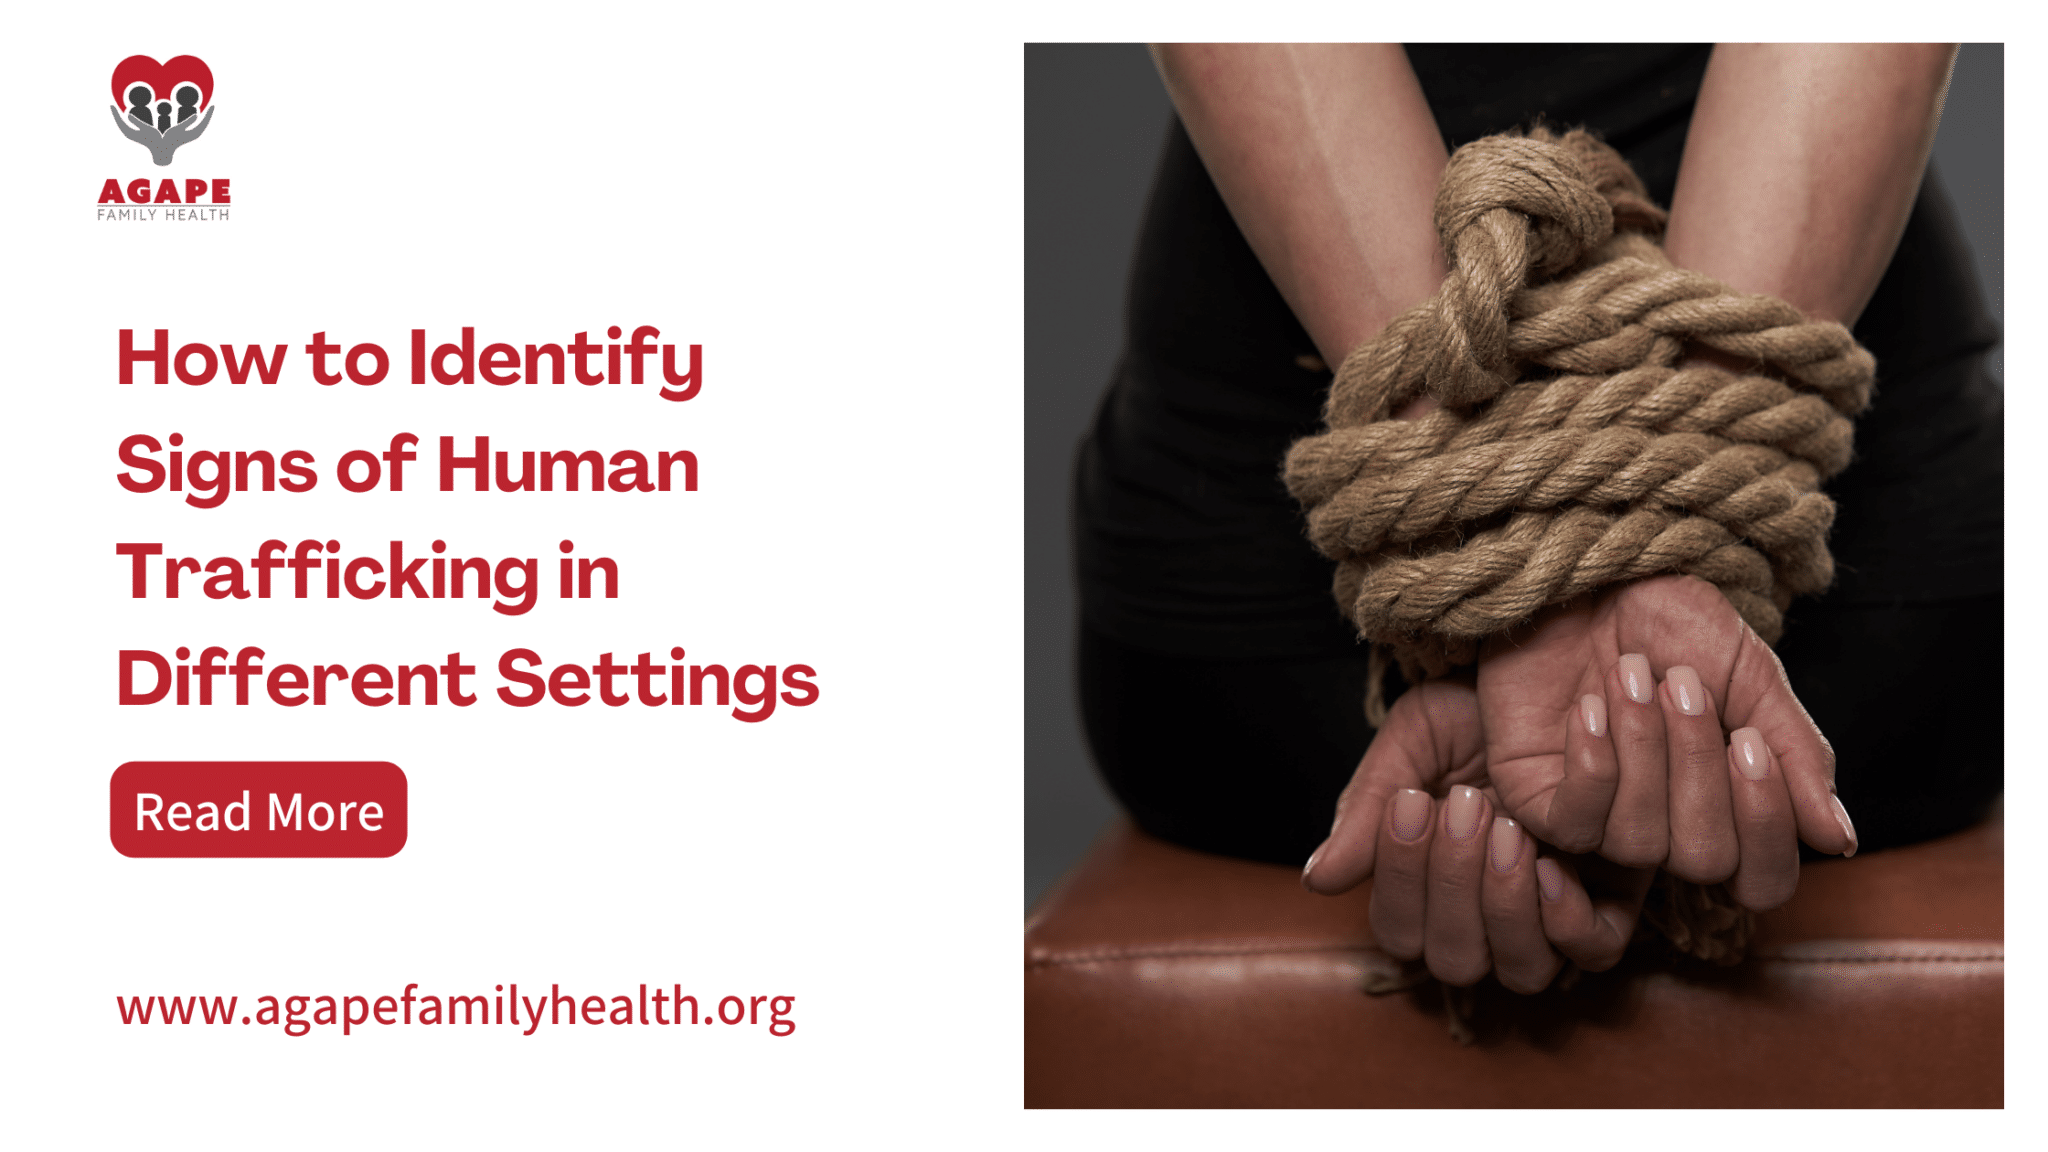 Identify Signs of Human Trafficking in Different Settings